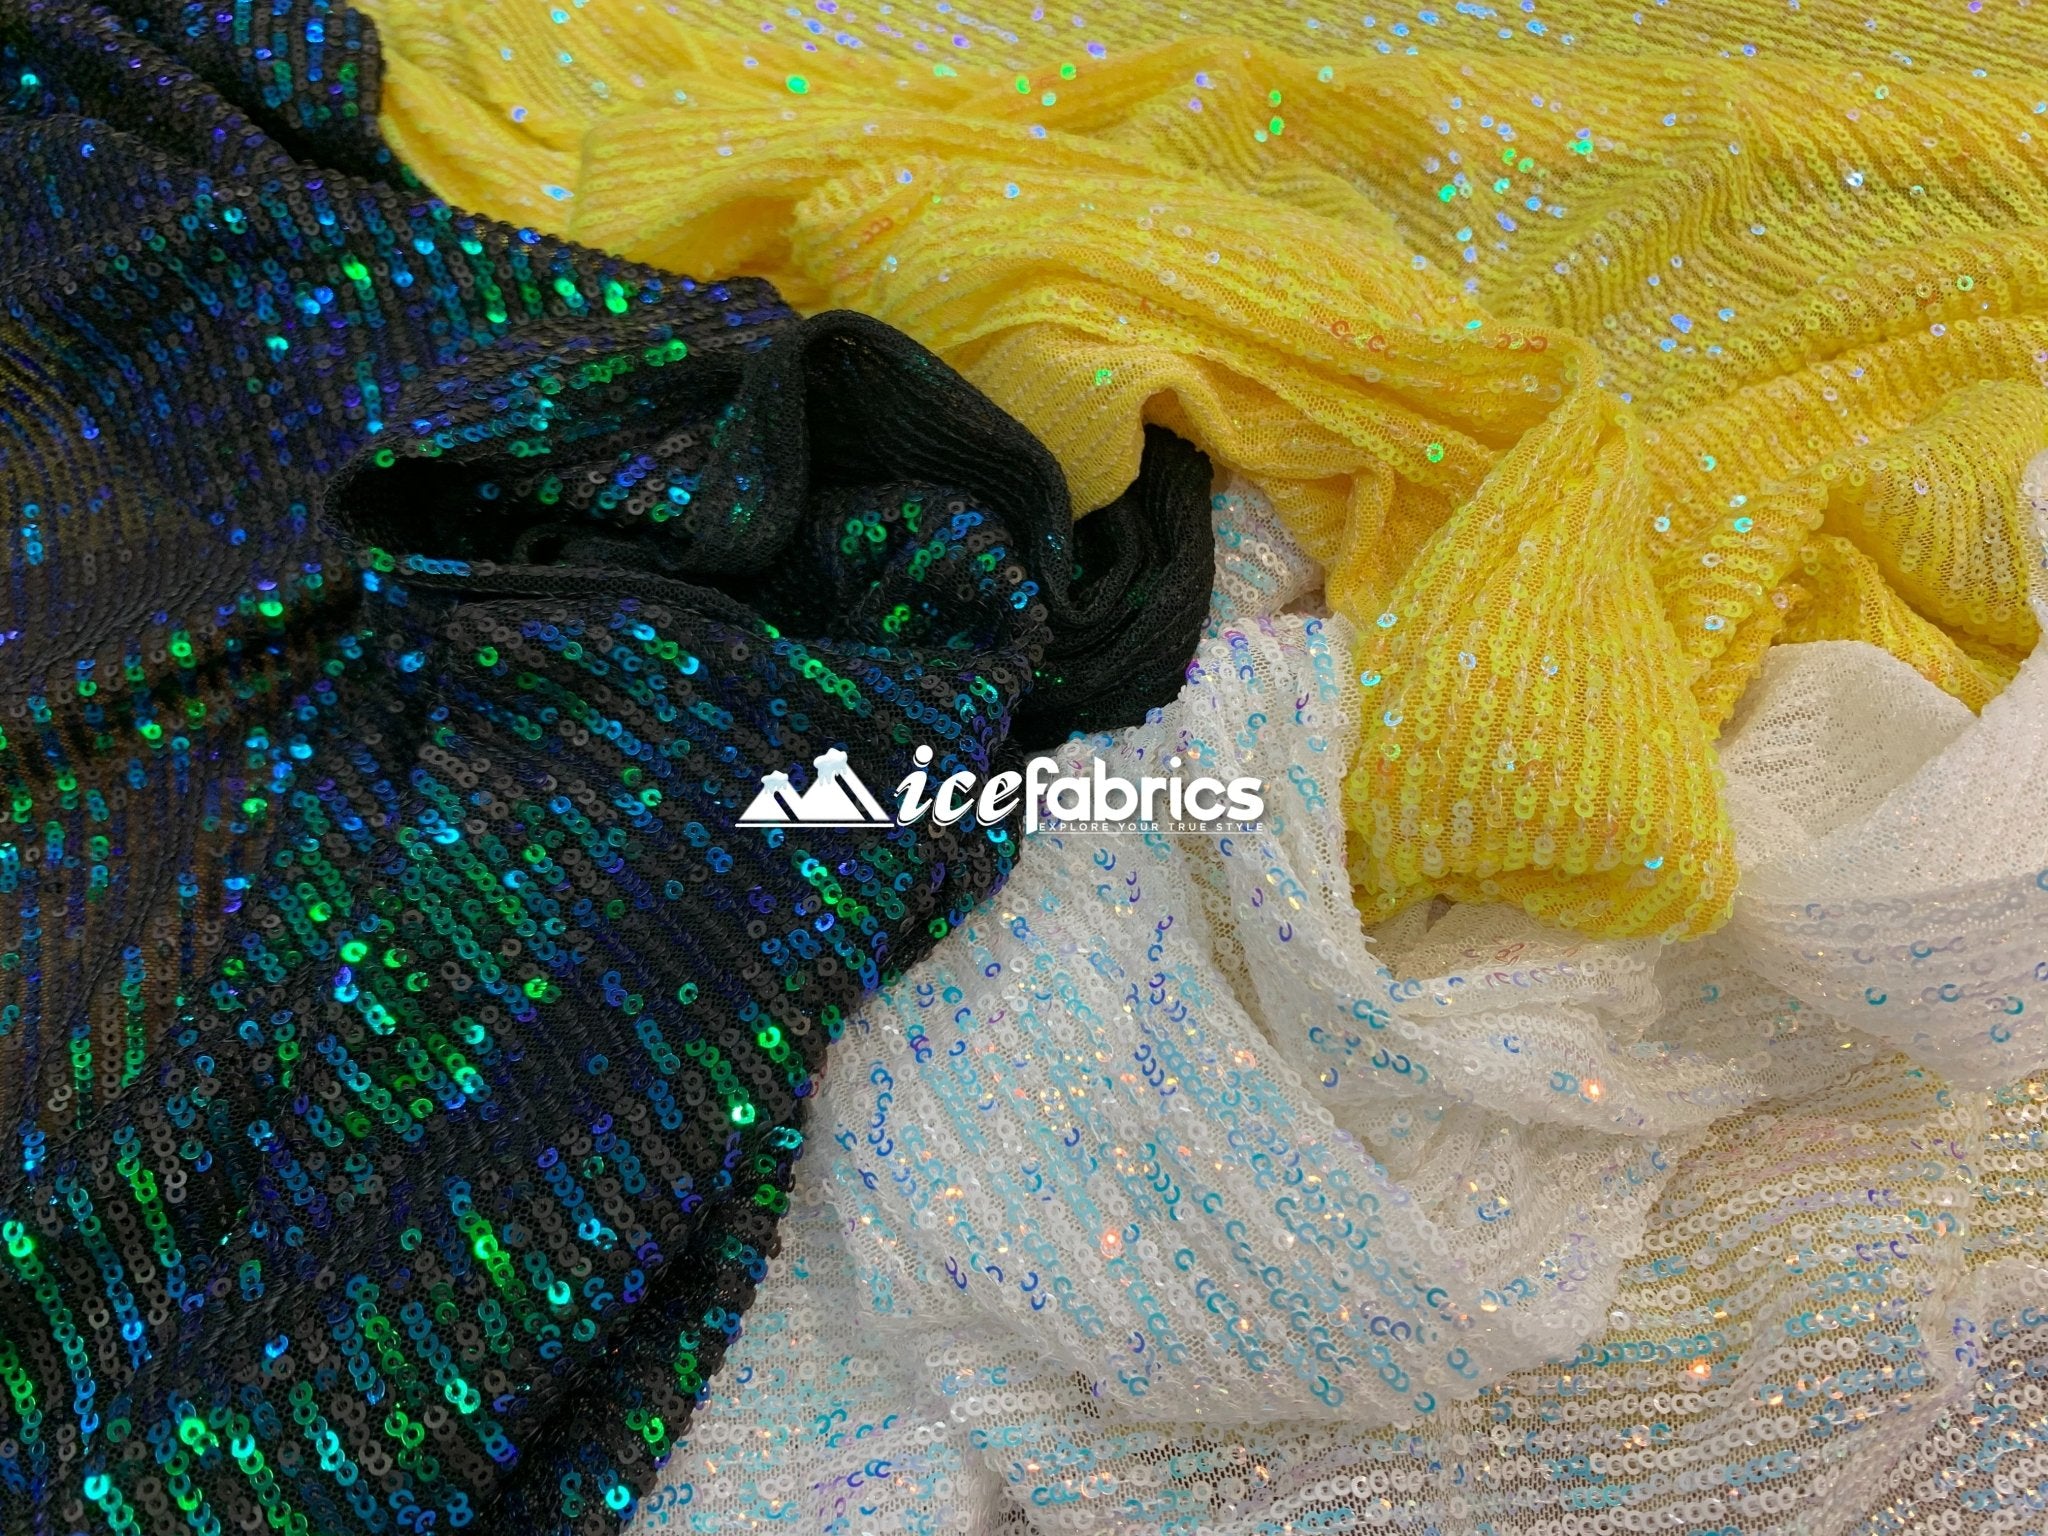 Iridescent Sequin 2 Way Mesh Stretch Sequins Fabric By The YardICEFABRICICE FABRICSWhite Blue IridescentIridescent Sequin 2 Way Mesh Stretch Sequins Fabric By The Yard ICEFABRIC